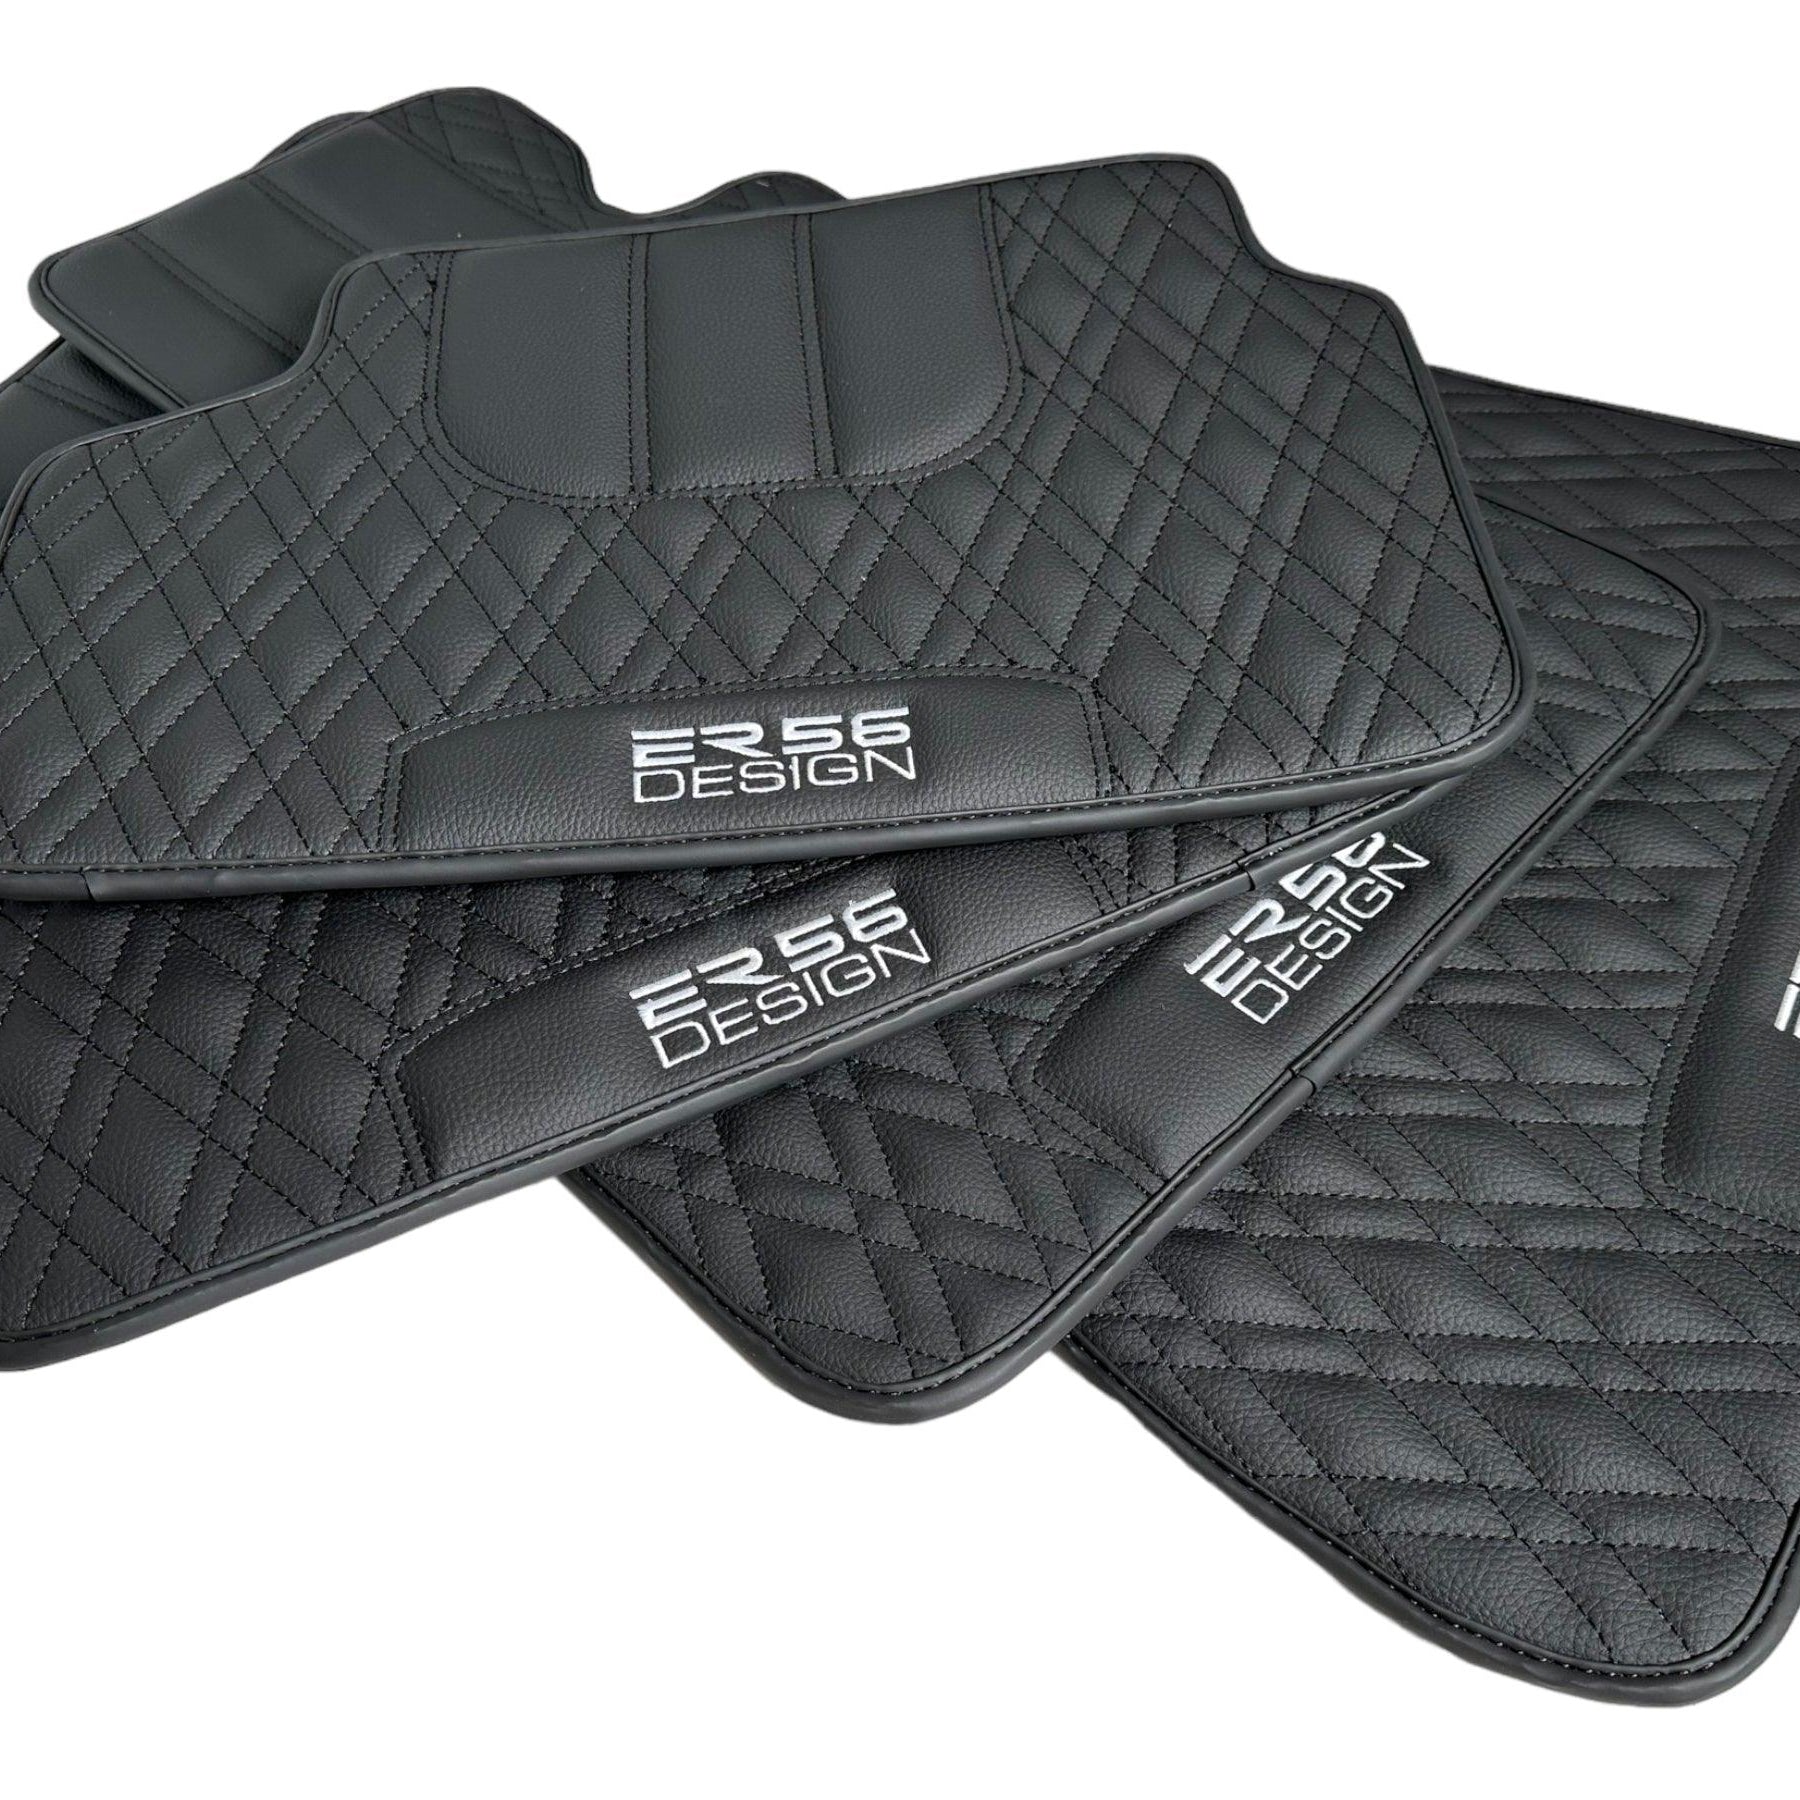 Floor Mats For BMW 2 Series F23 Convertible Black Leather Er56 Design - AutoWin